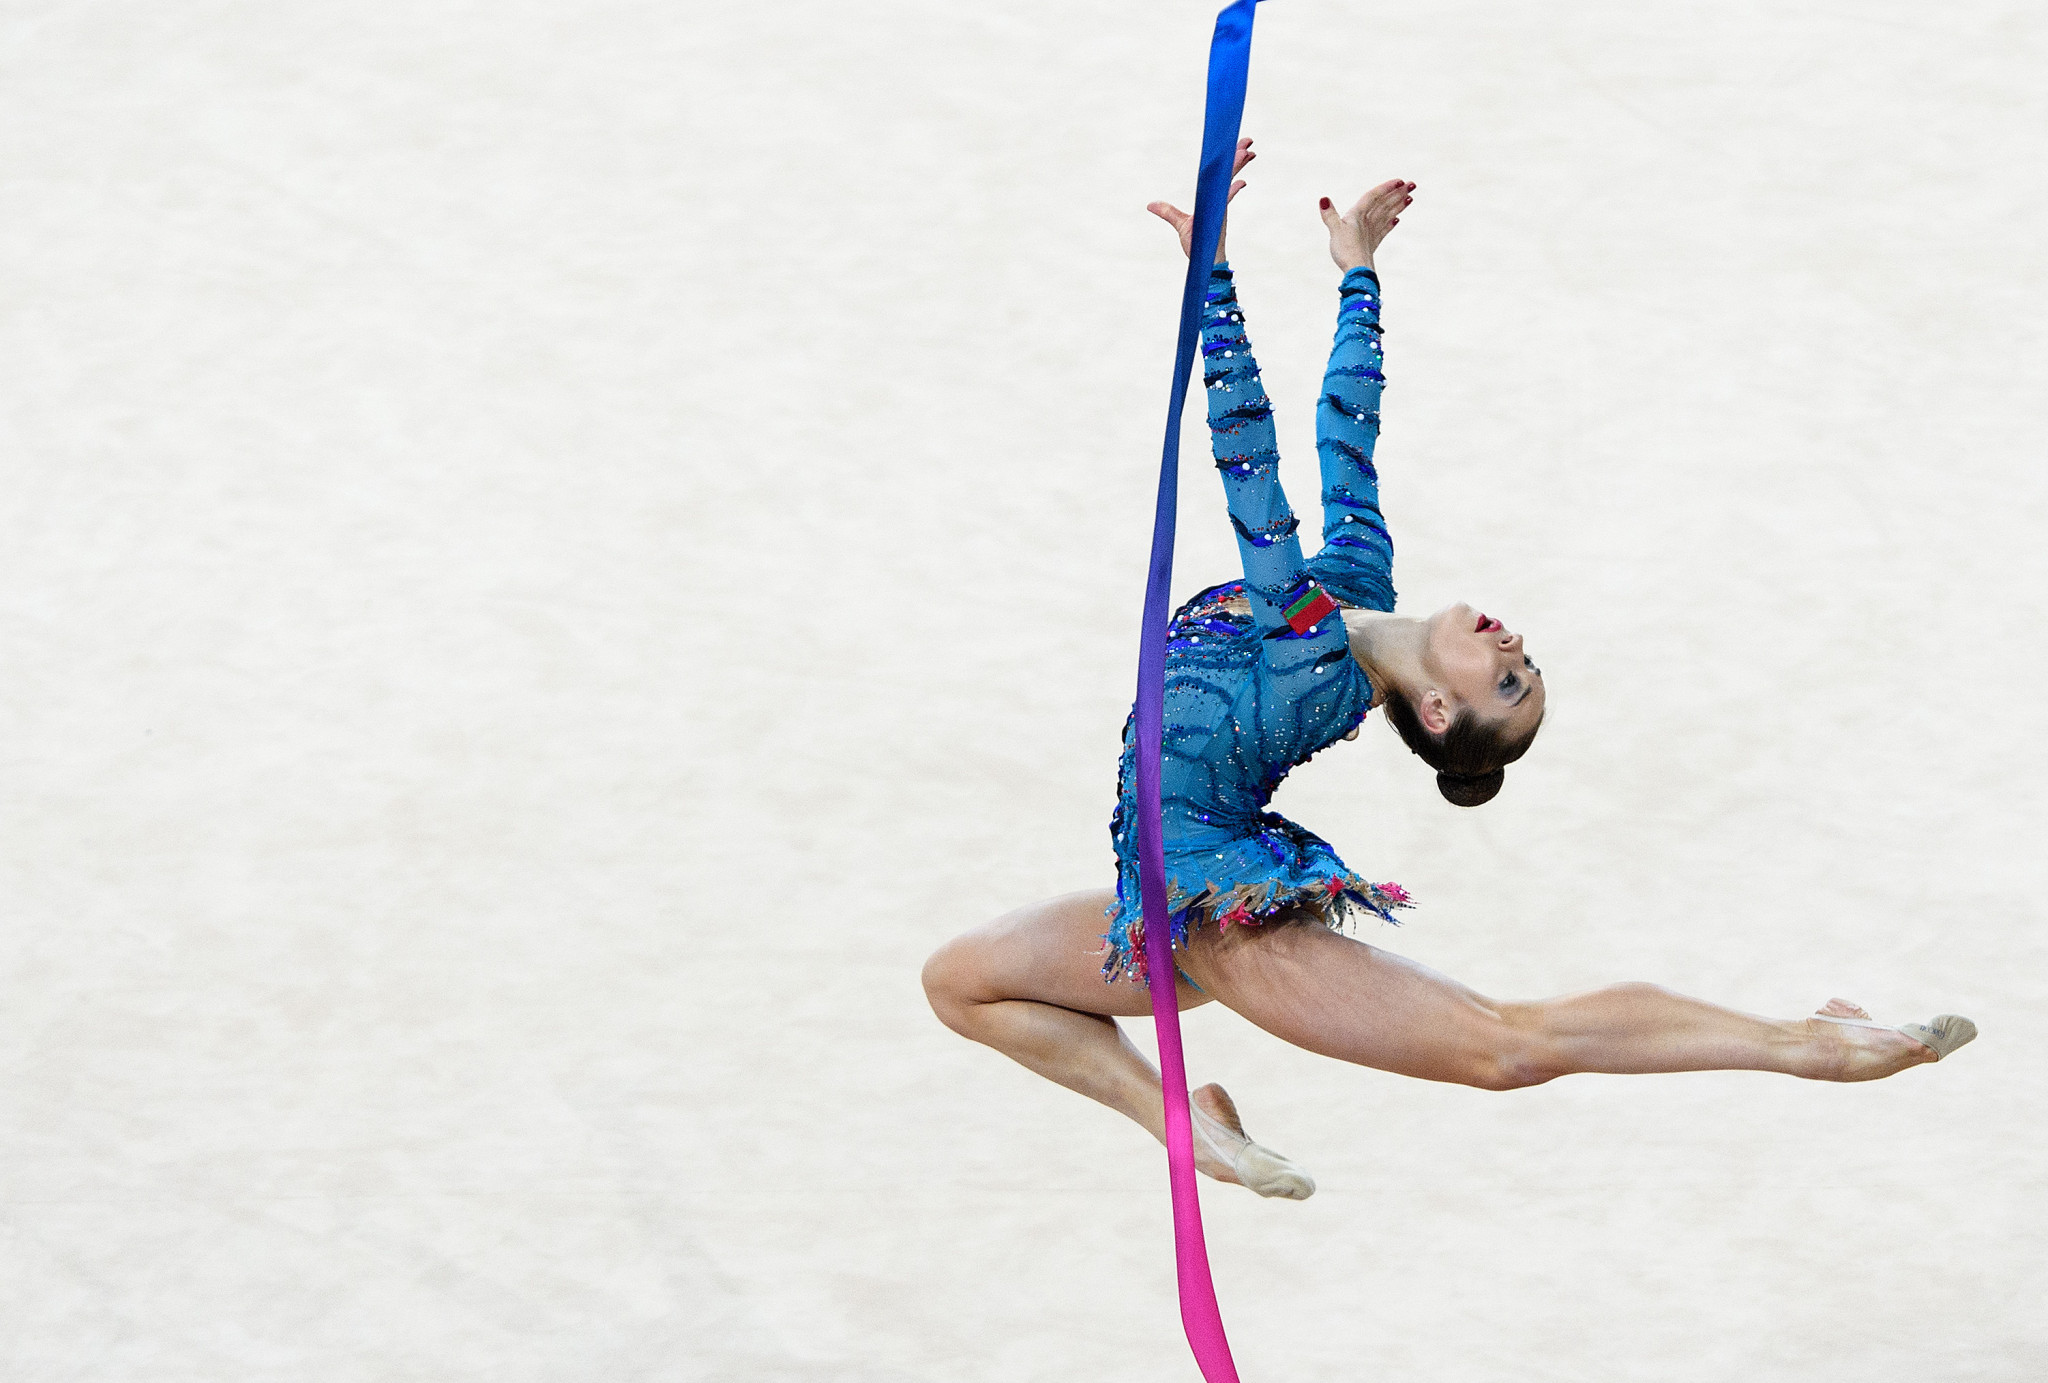 Halkina seeking to defend title on home soil at FIG World Challenge Cup in Minsk